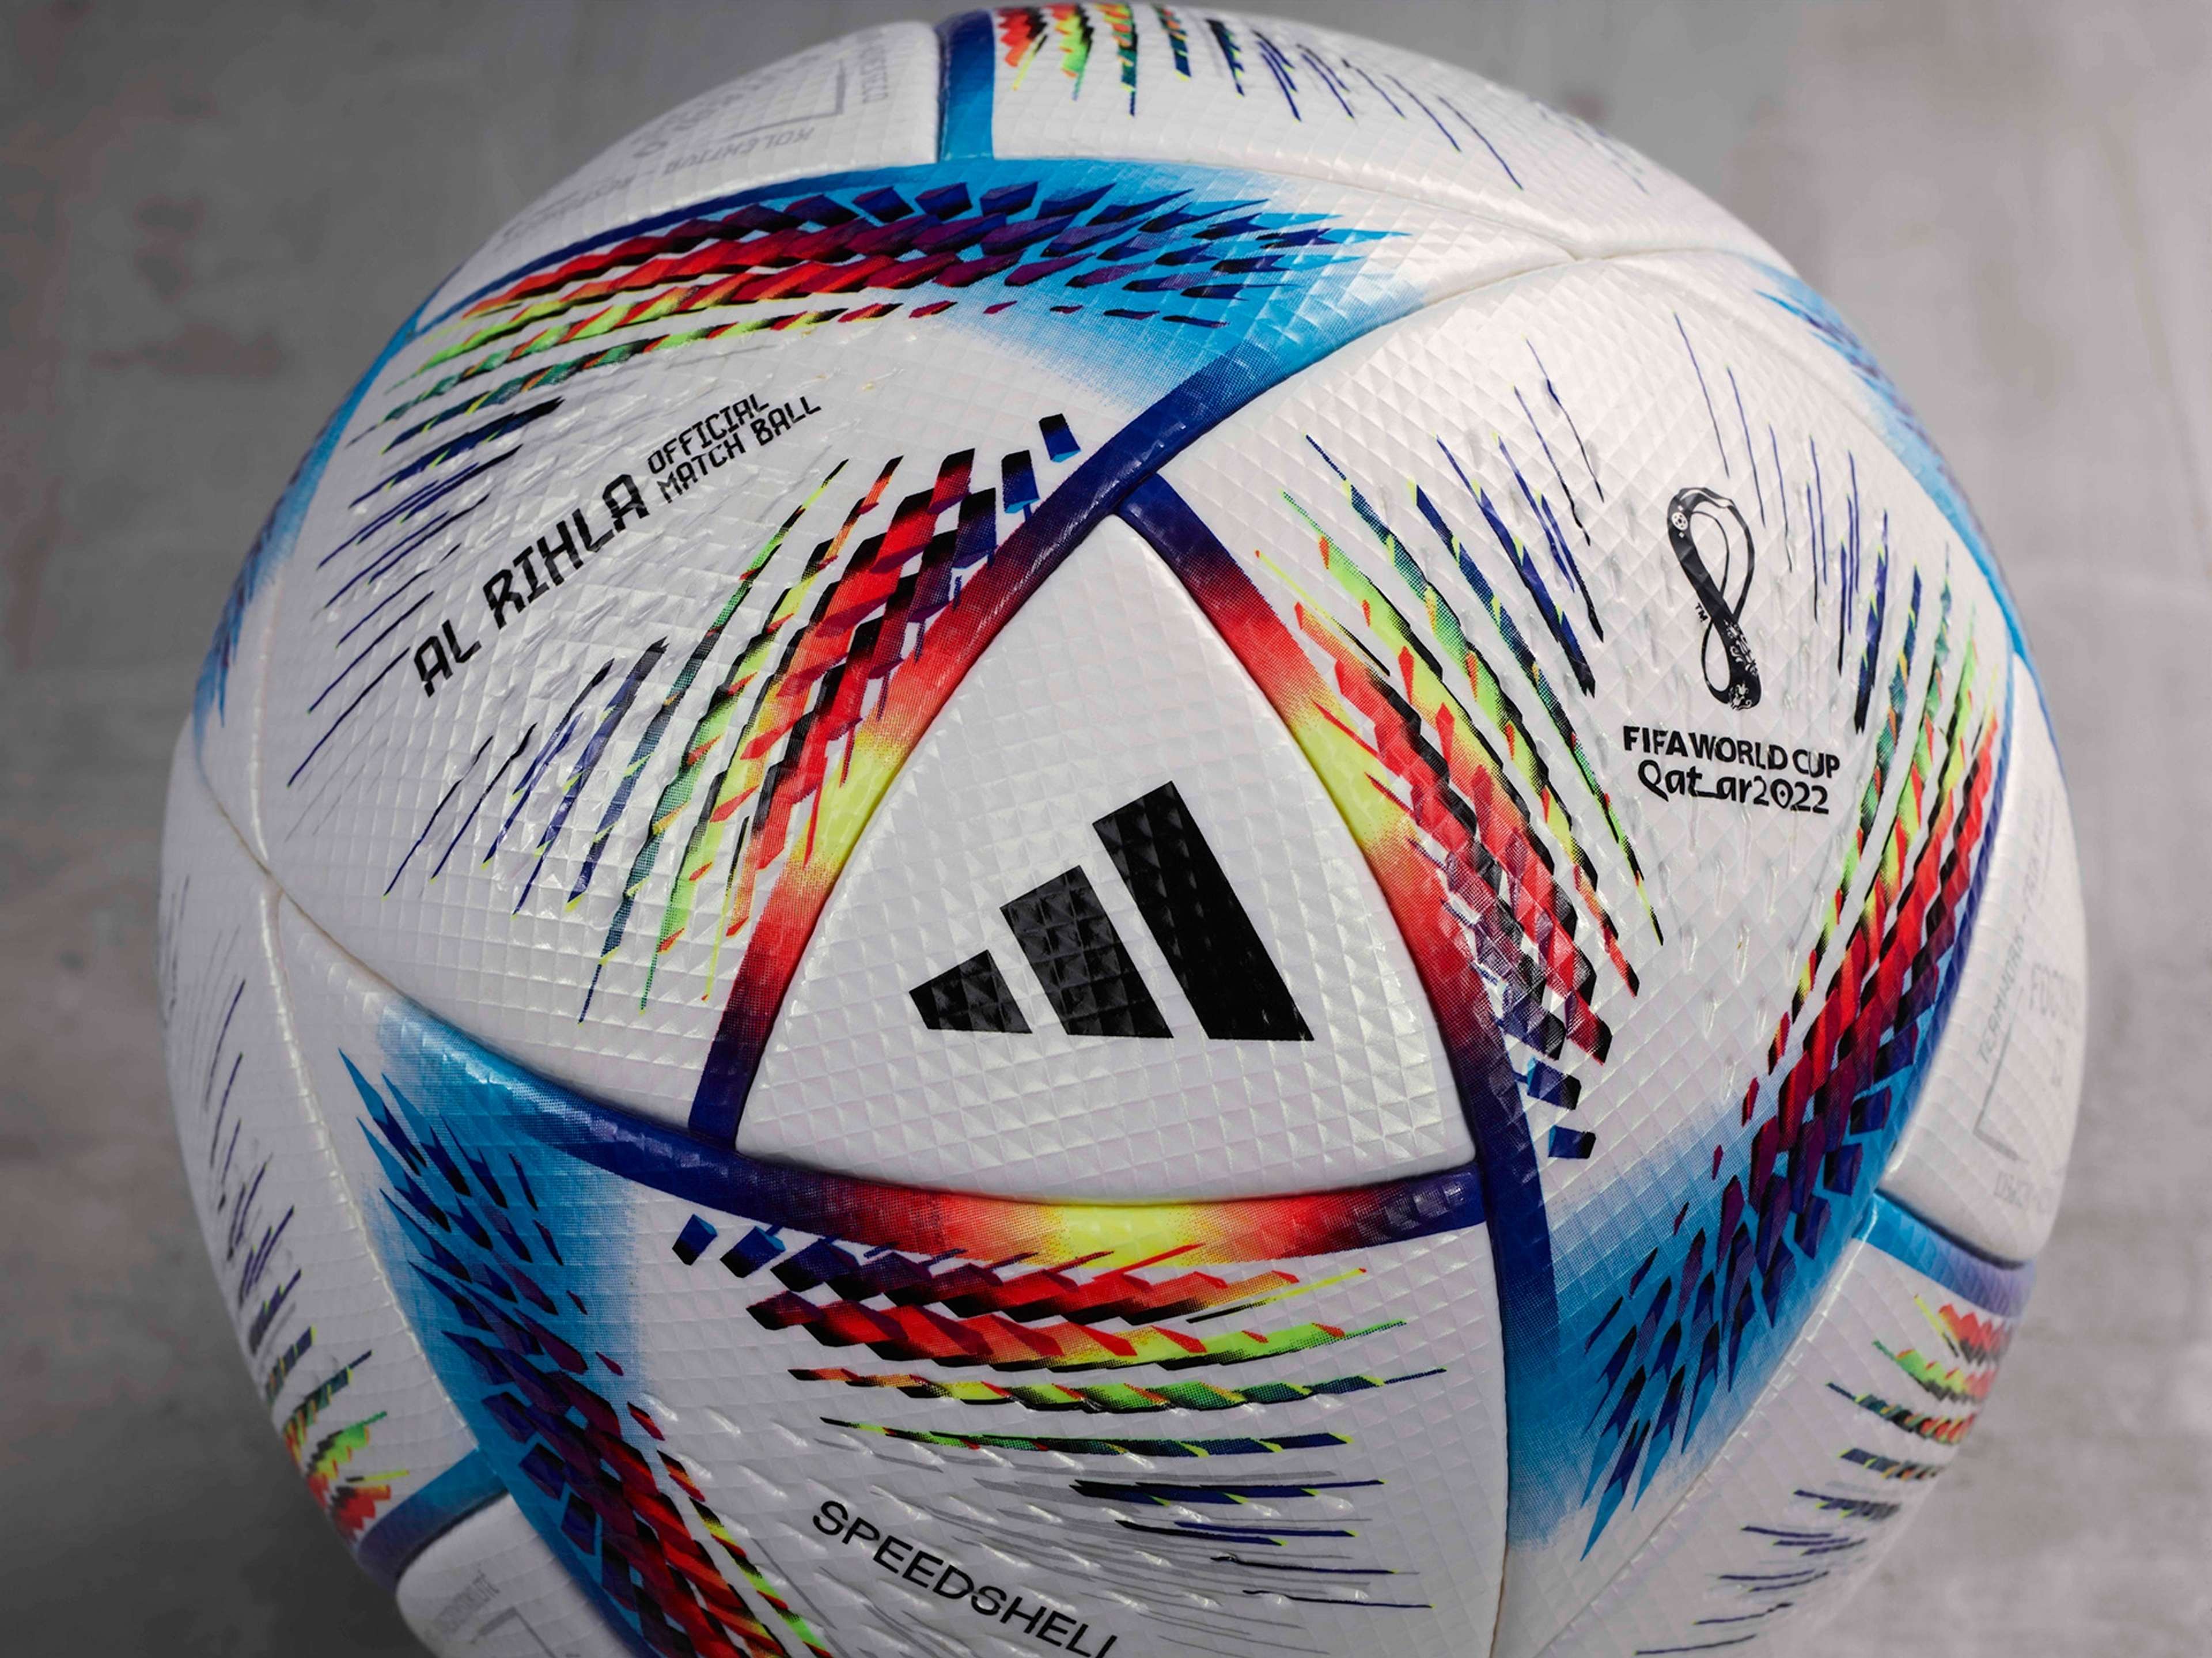 EMBED ONLY Al Rihla 2022 World Cup official match ball